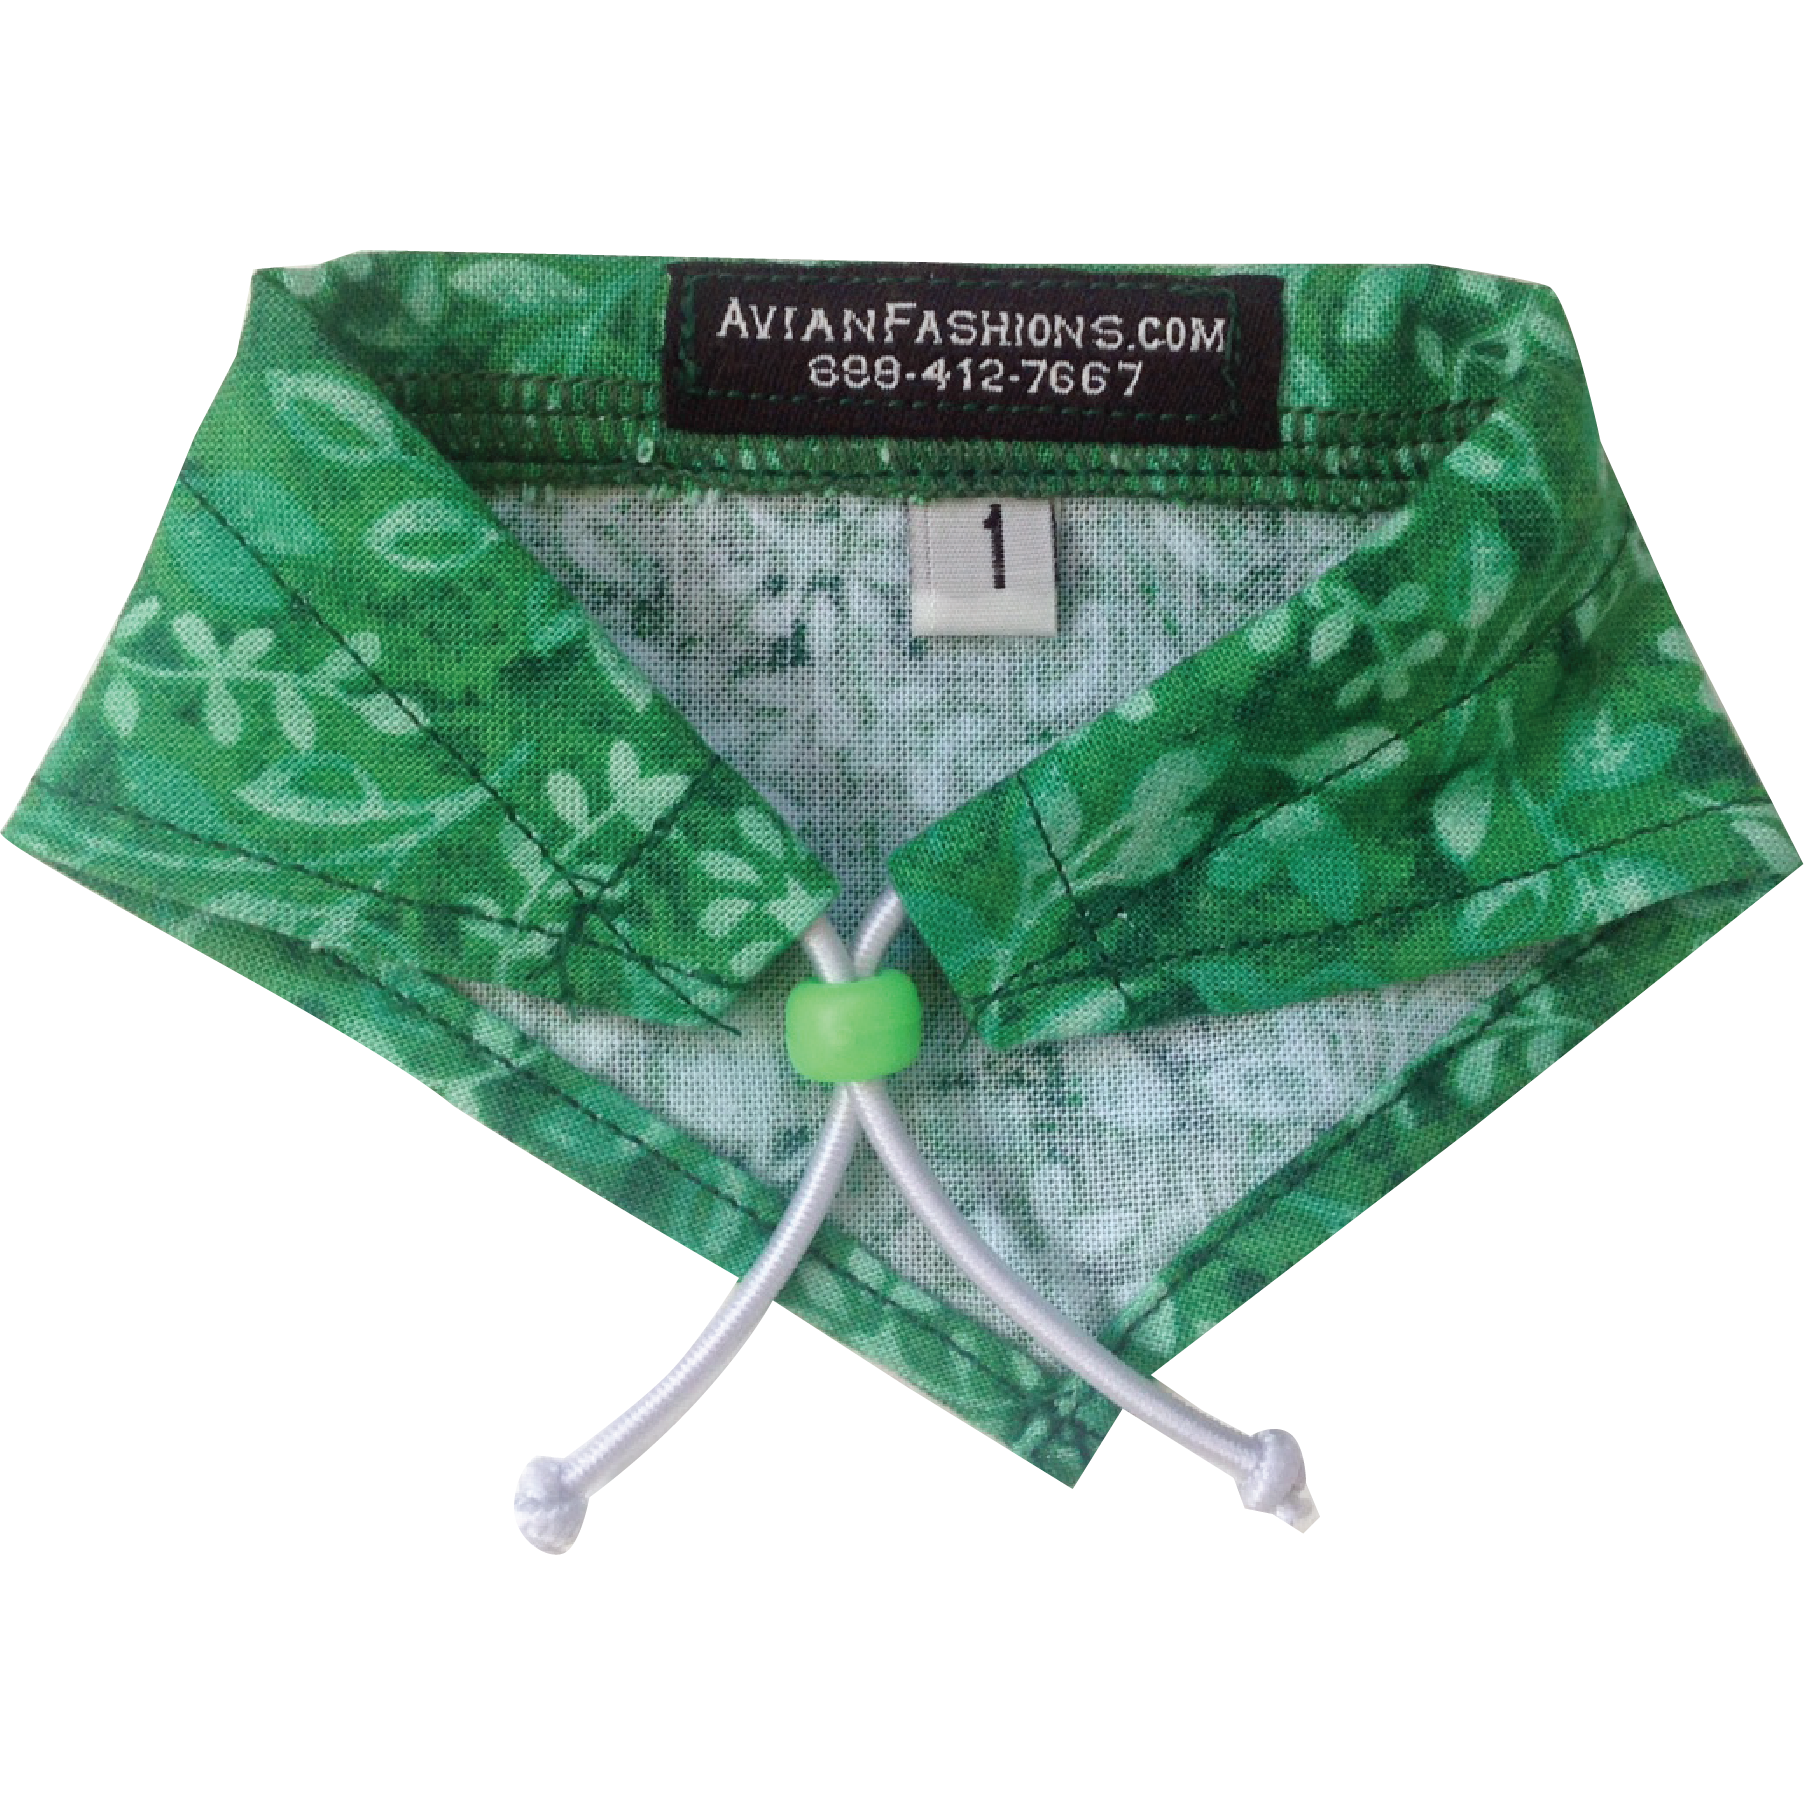 Online Only for 7.98 at Shop - usd Green Bandana Fashions Avian Floral the